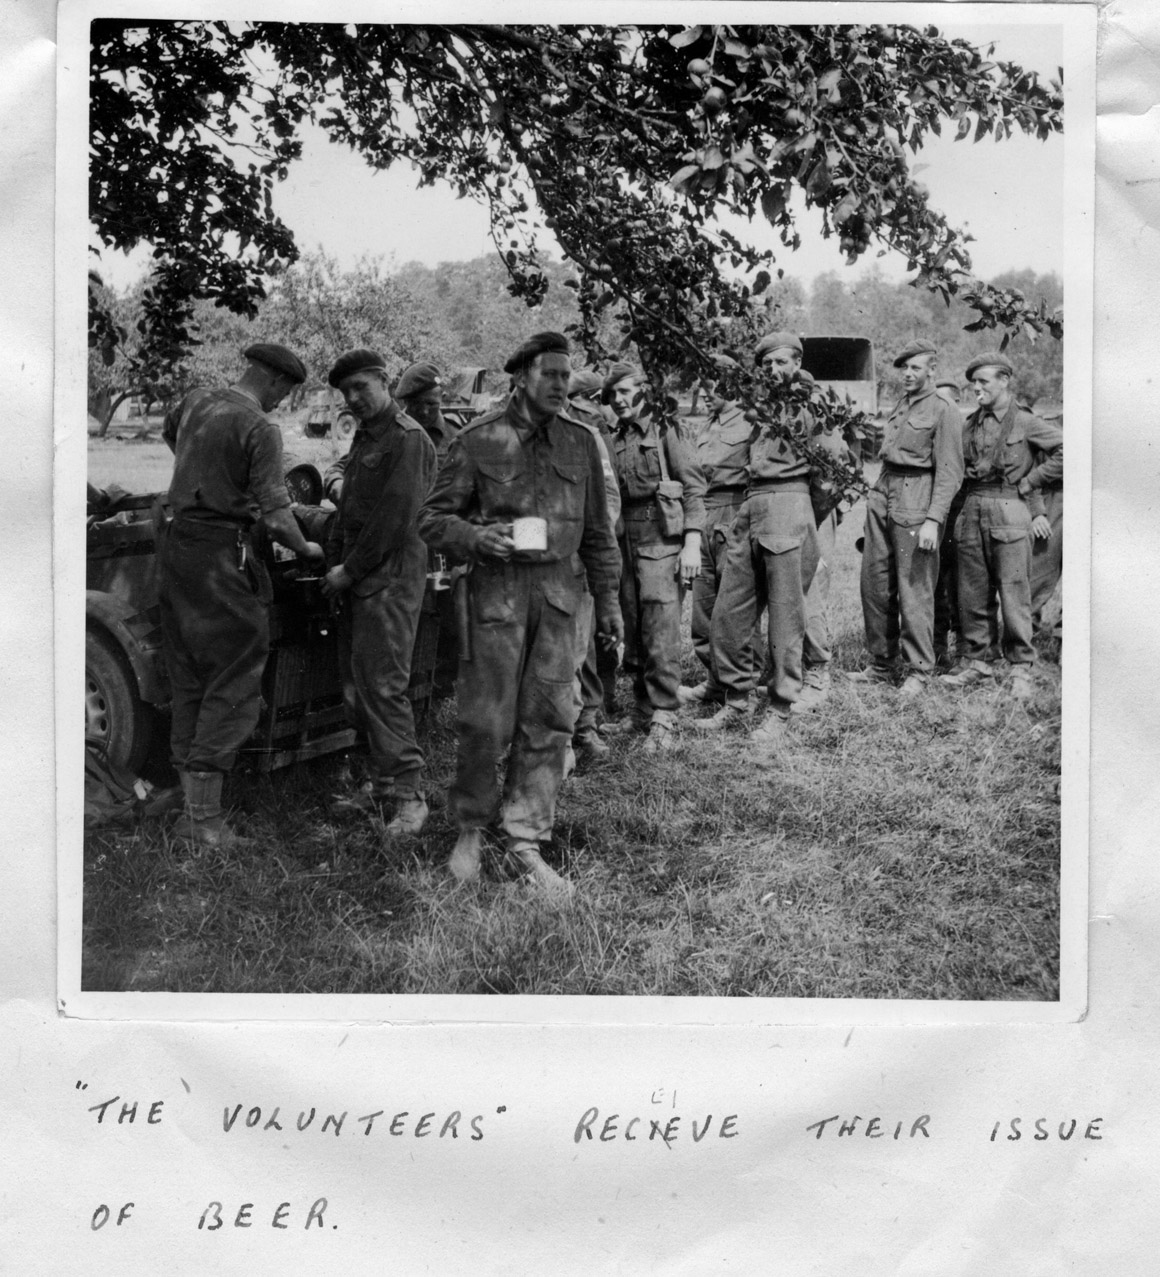 "Volunteers receive their issue of beer"  near Le Mesnil, August 1944